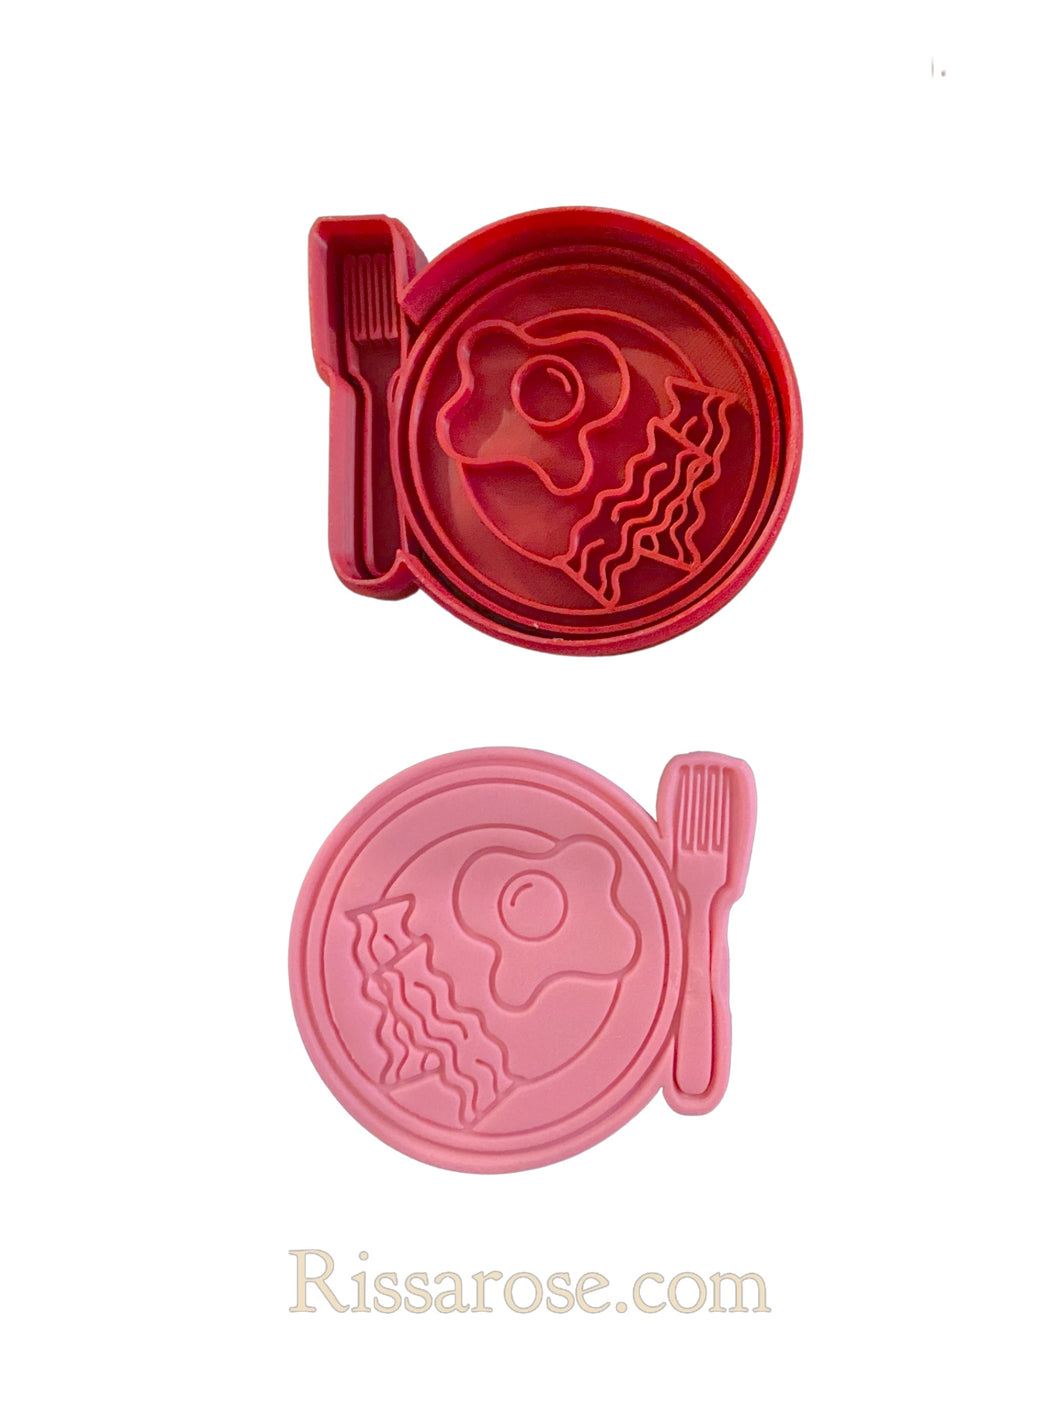 mother's day cookie cutter and stamp set  - breakfast, card, coffee and carnations flower bacon and egg